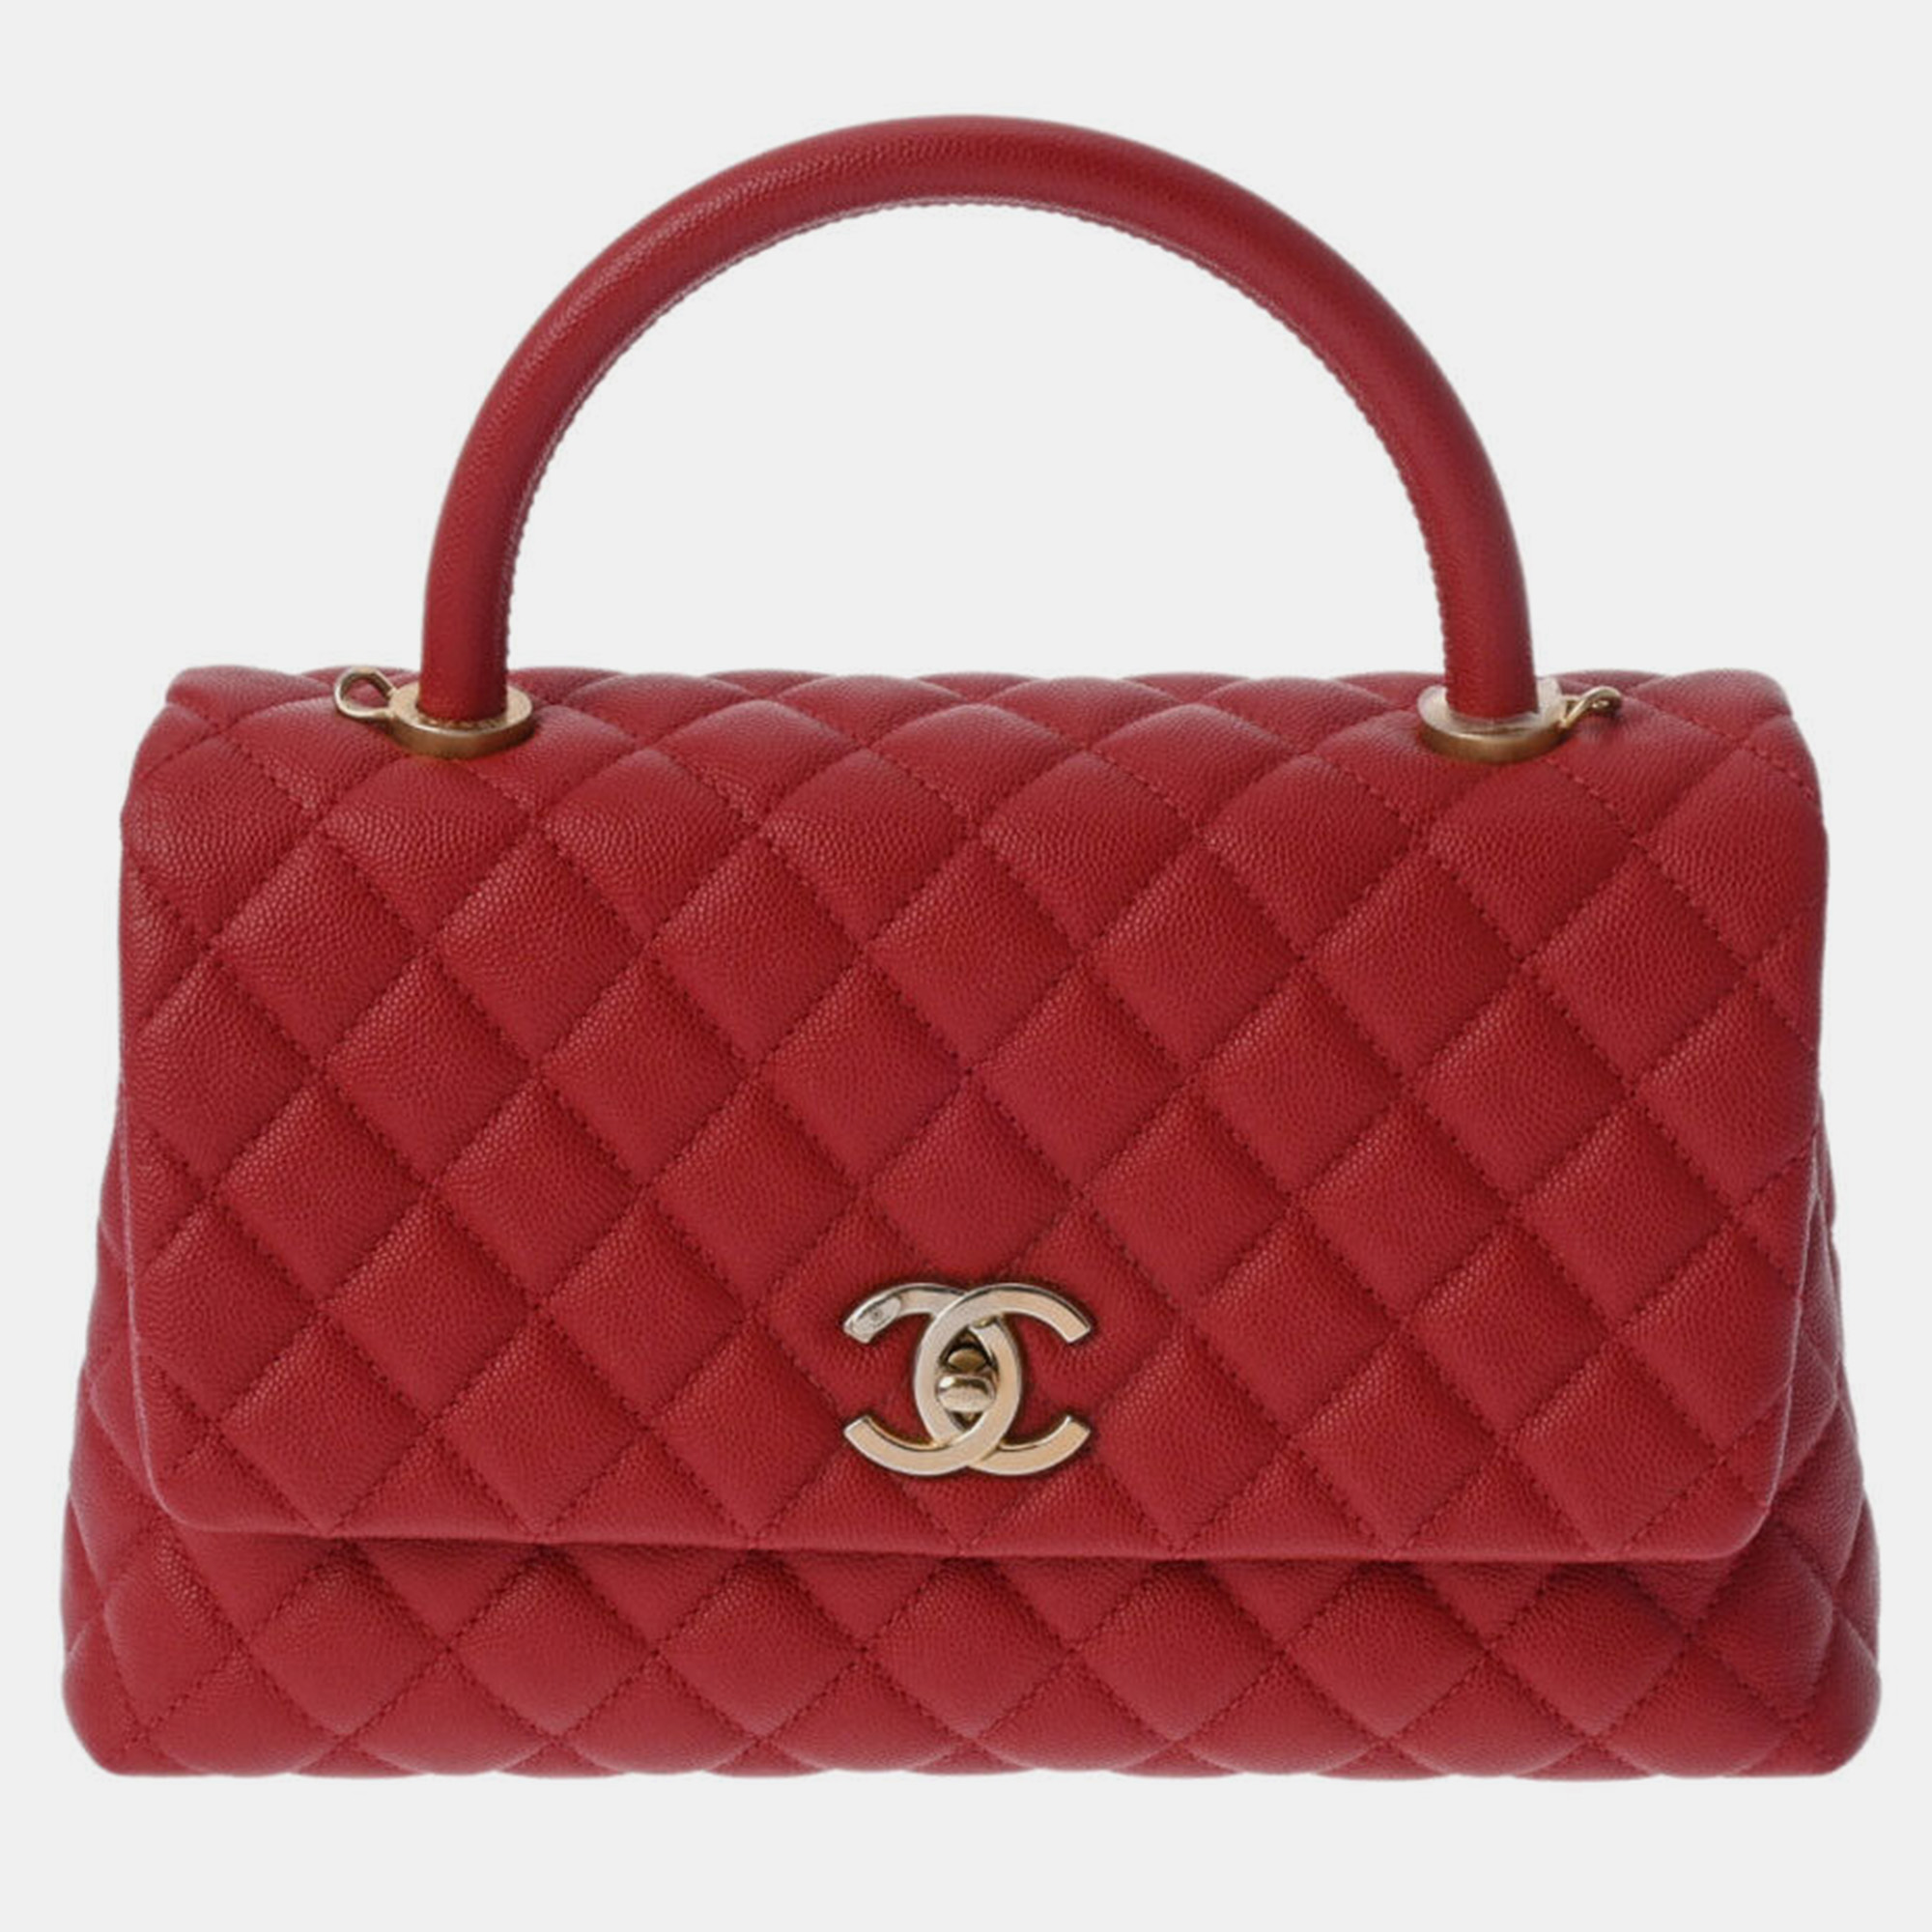 Chanel red caviar leather coco top handle bag